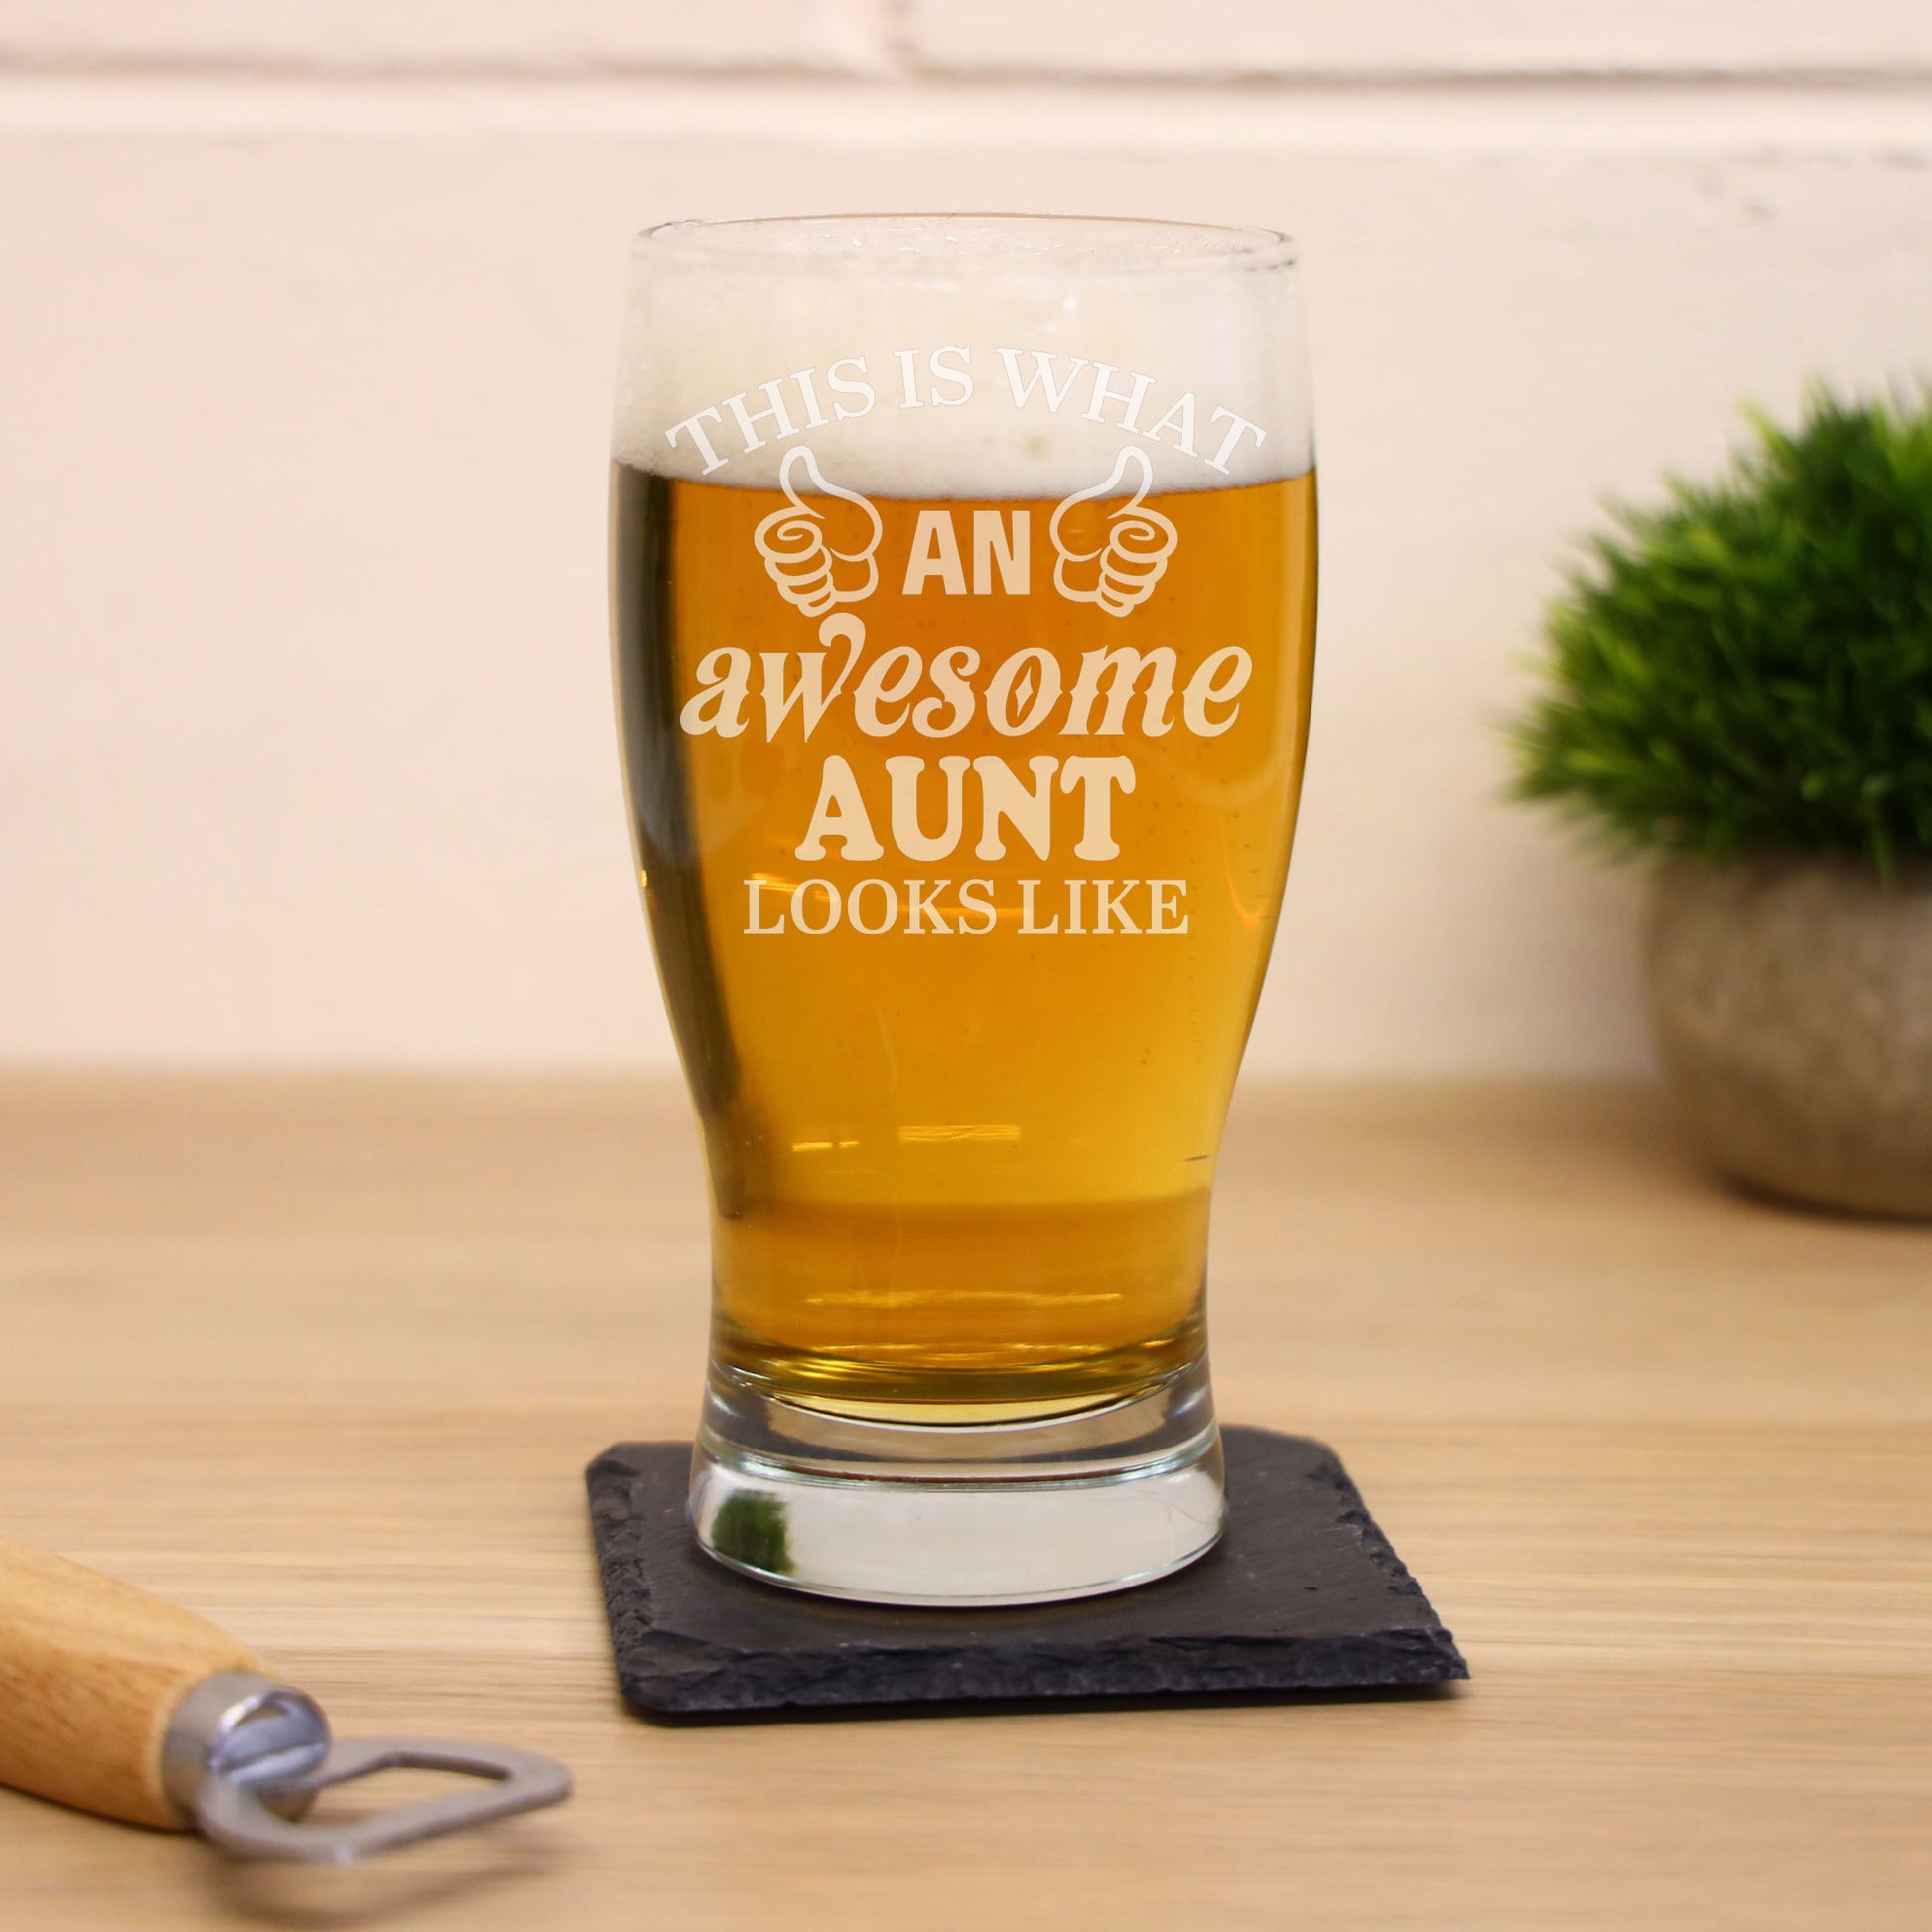 "This Is What An Awesome Person Looks Like" Novelty Engraved Pint Glass  - Always Looking Good -   